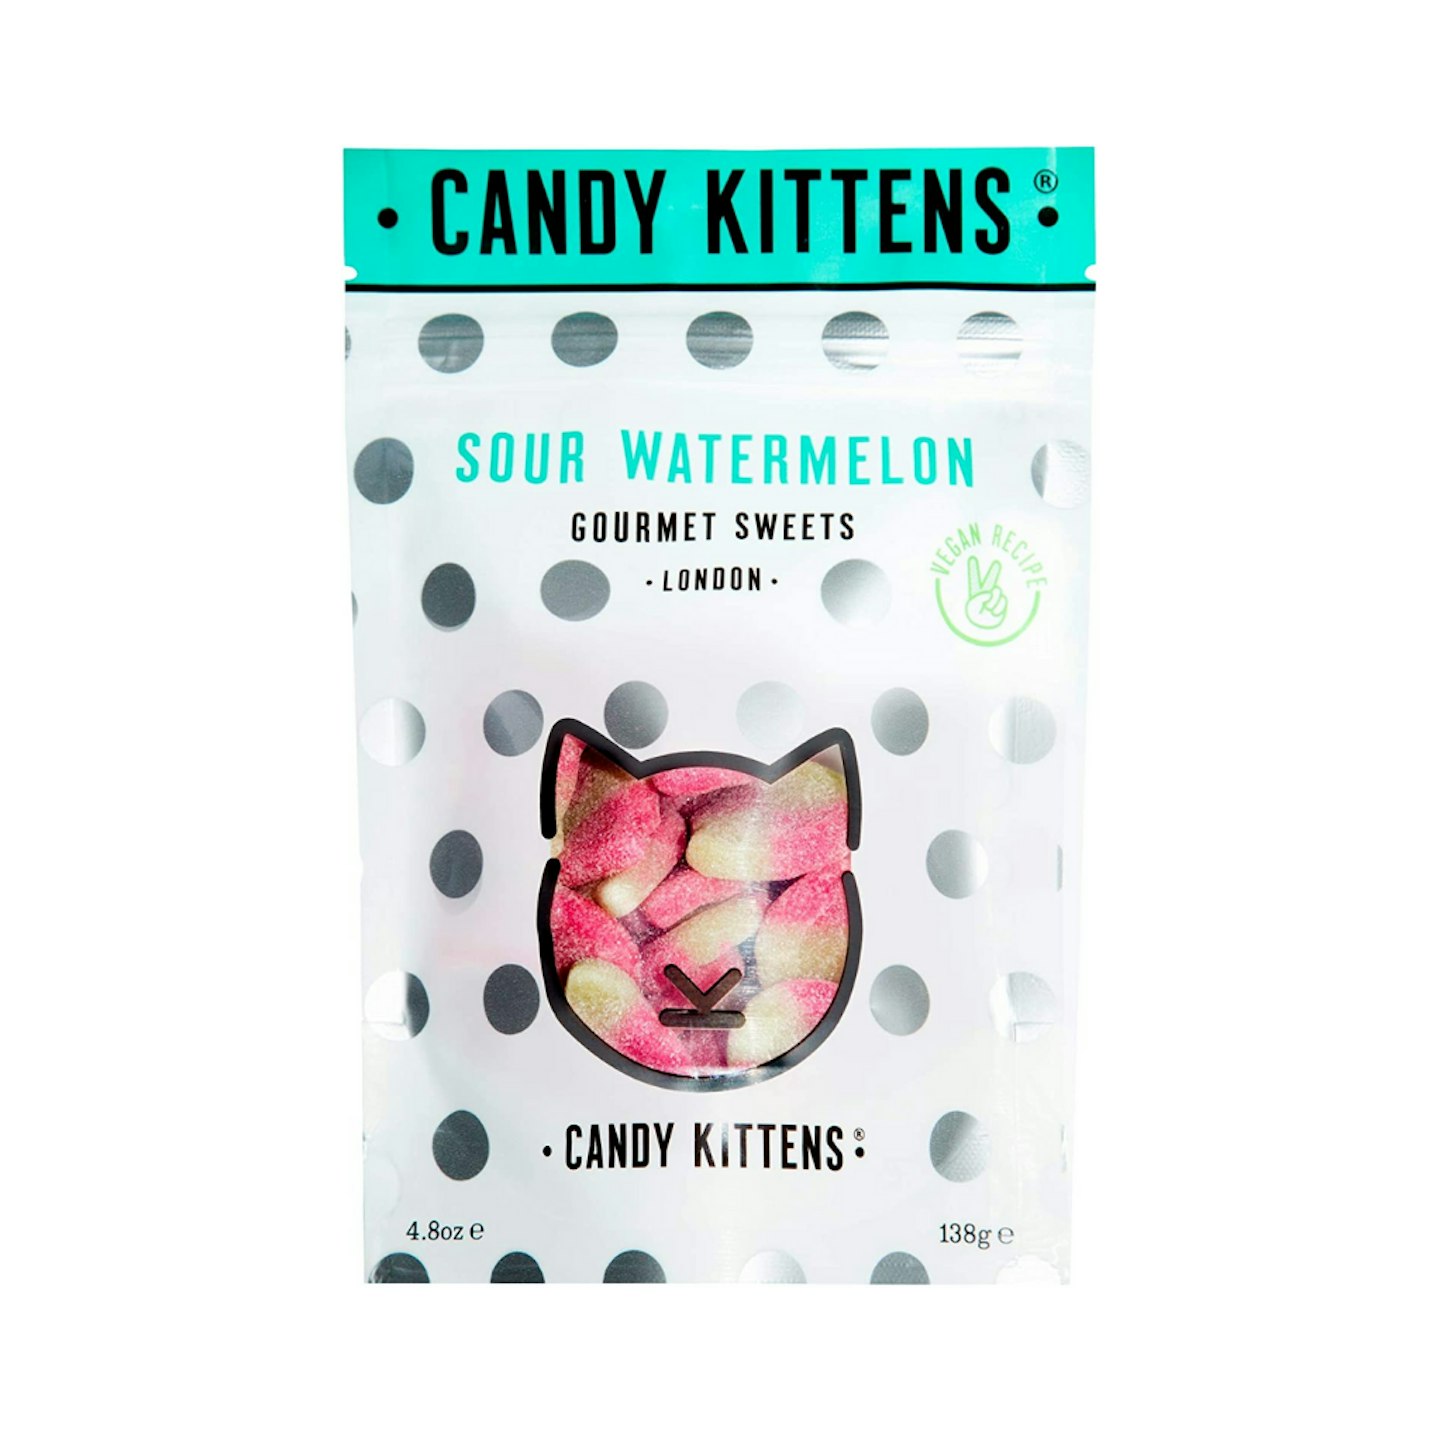 Candy Kittens Sour Watermelon Vegan Sweets